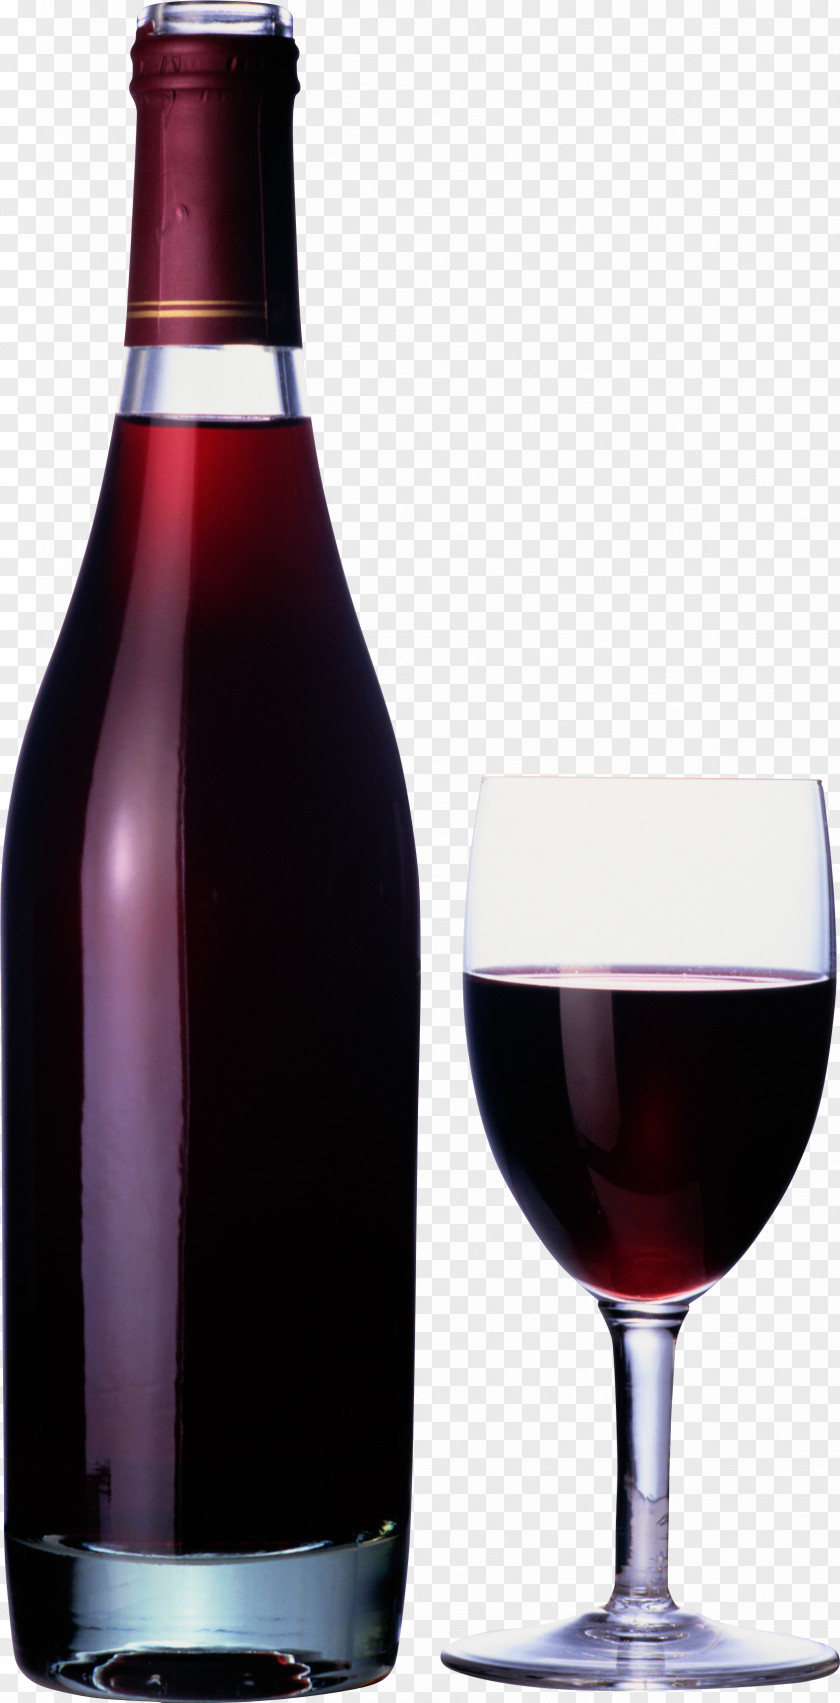 Wine Glass Bottle Champagne Pinot Noir PNG